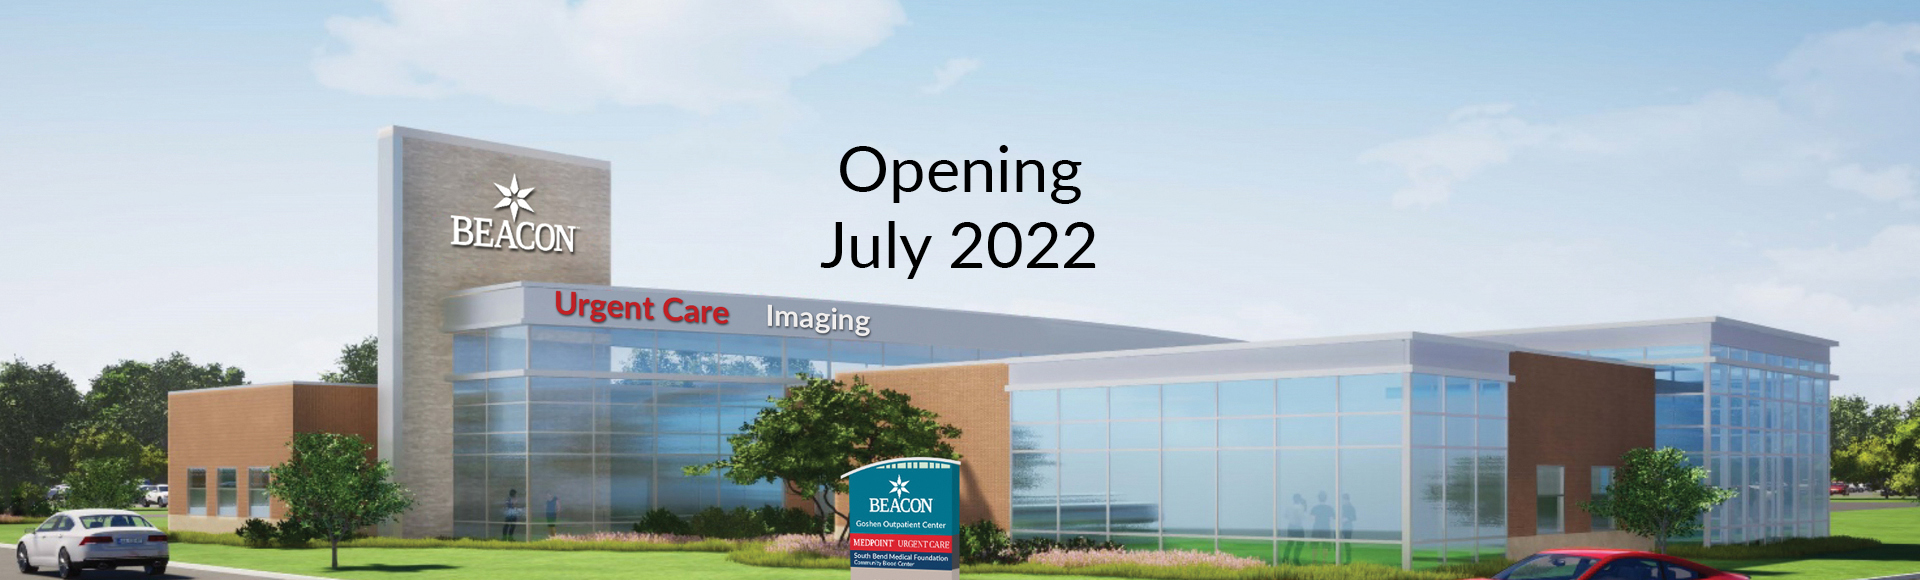 Beacon Goshen Outpatient Center Opening July 2022